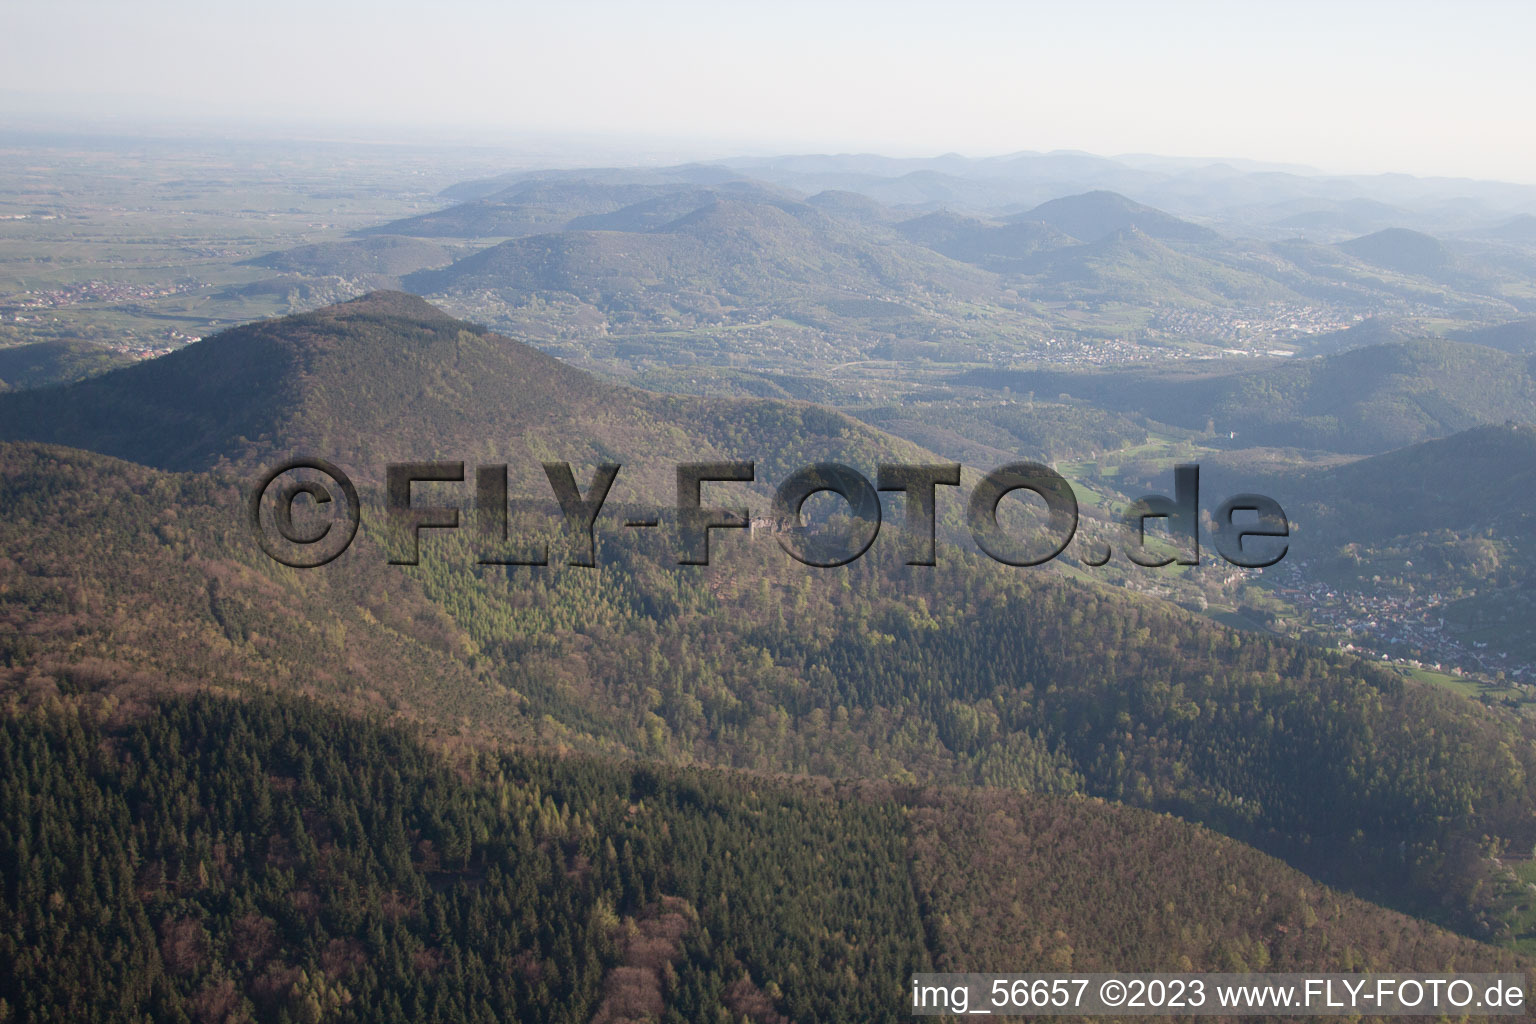 Aerial photograpy of Ramberg in the state Rhineland-Palatinate, Germany